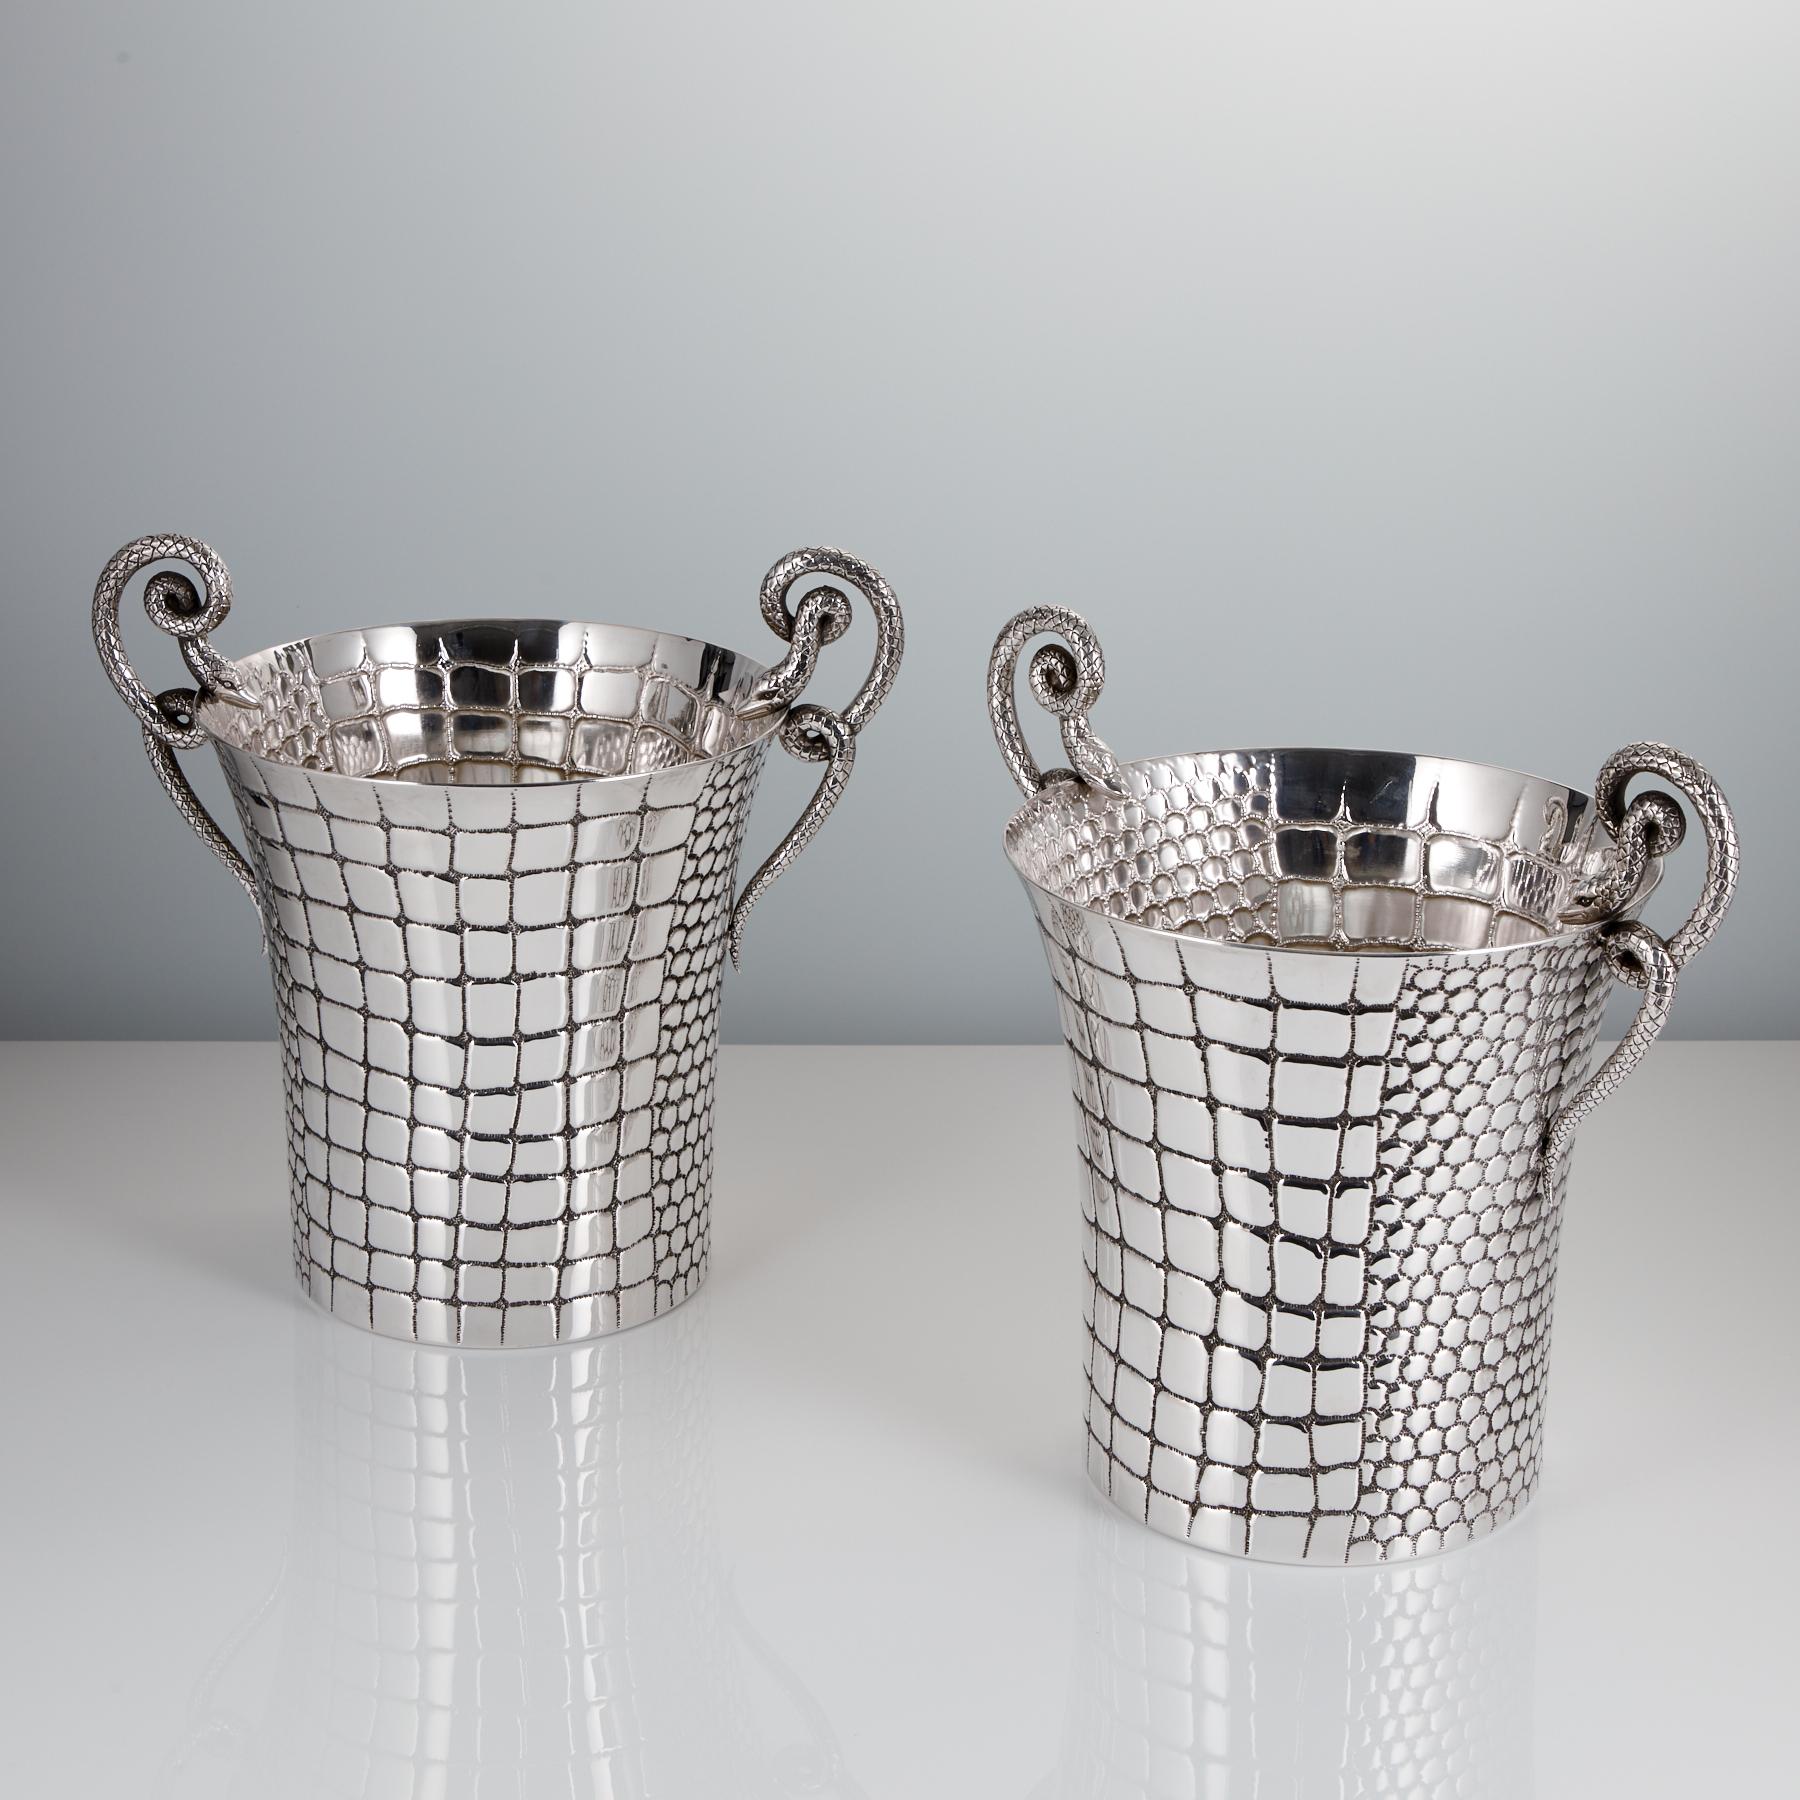 Discover a remarkable pair of mid-20th century Silver Champagne Coolers, hand-embossed with luxurious crocodile skin by master silversmith Paolo Scavia from Valenza, Italy, circa 1945-1950.

With a timeless design, these coolers are not only